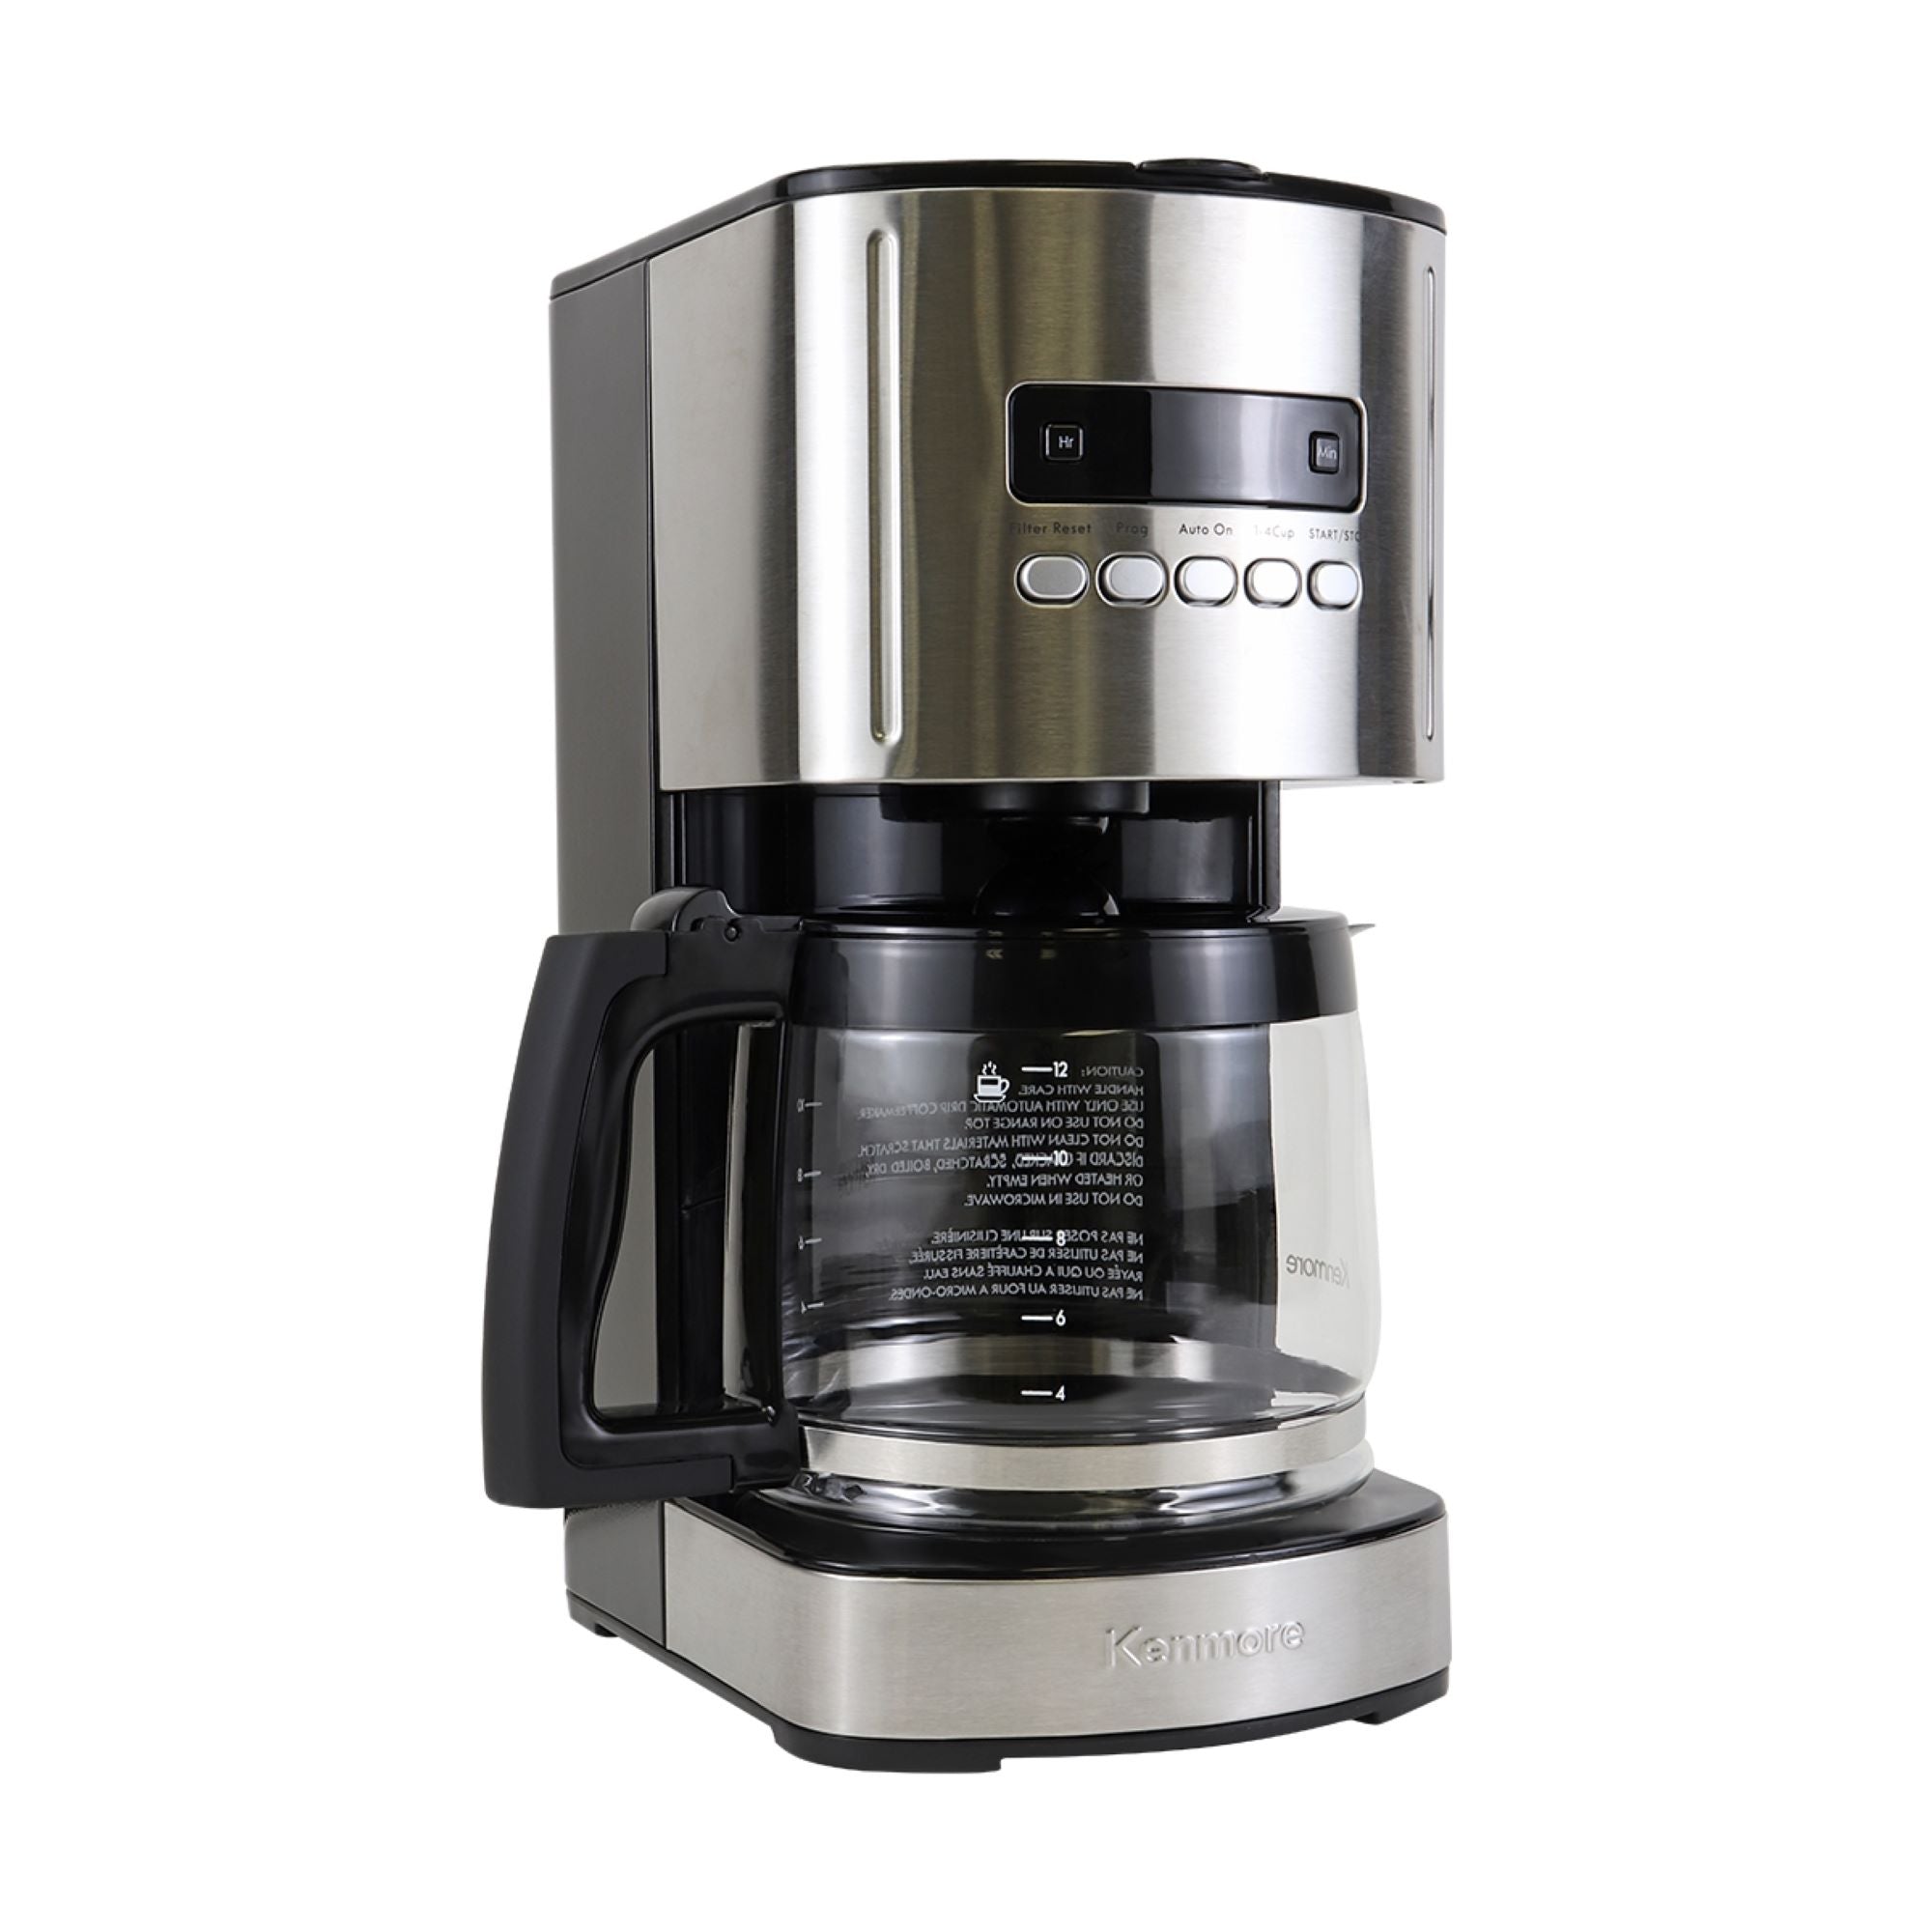 Kenmore 12 cup programmable coffeemaker on a white background